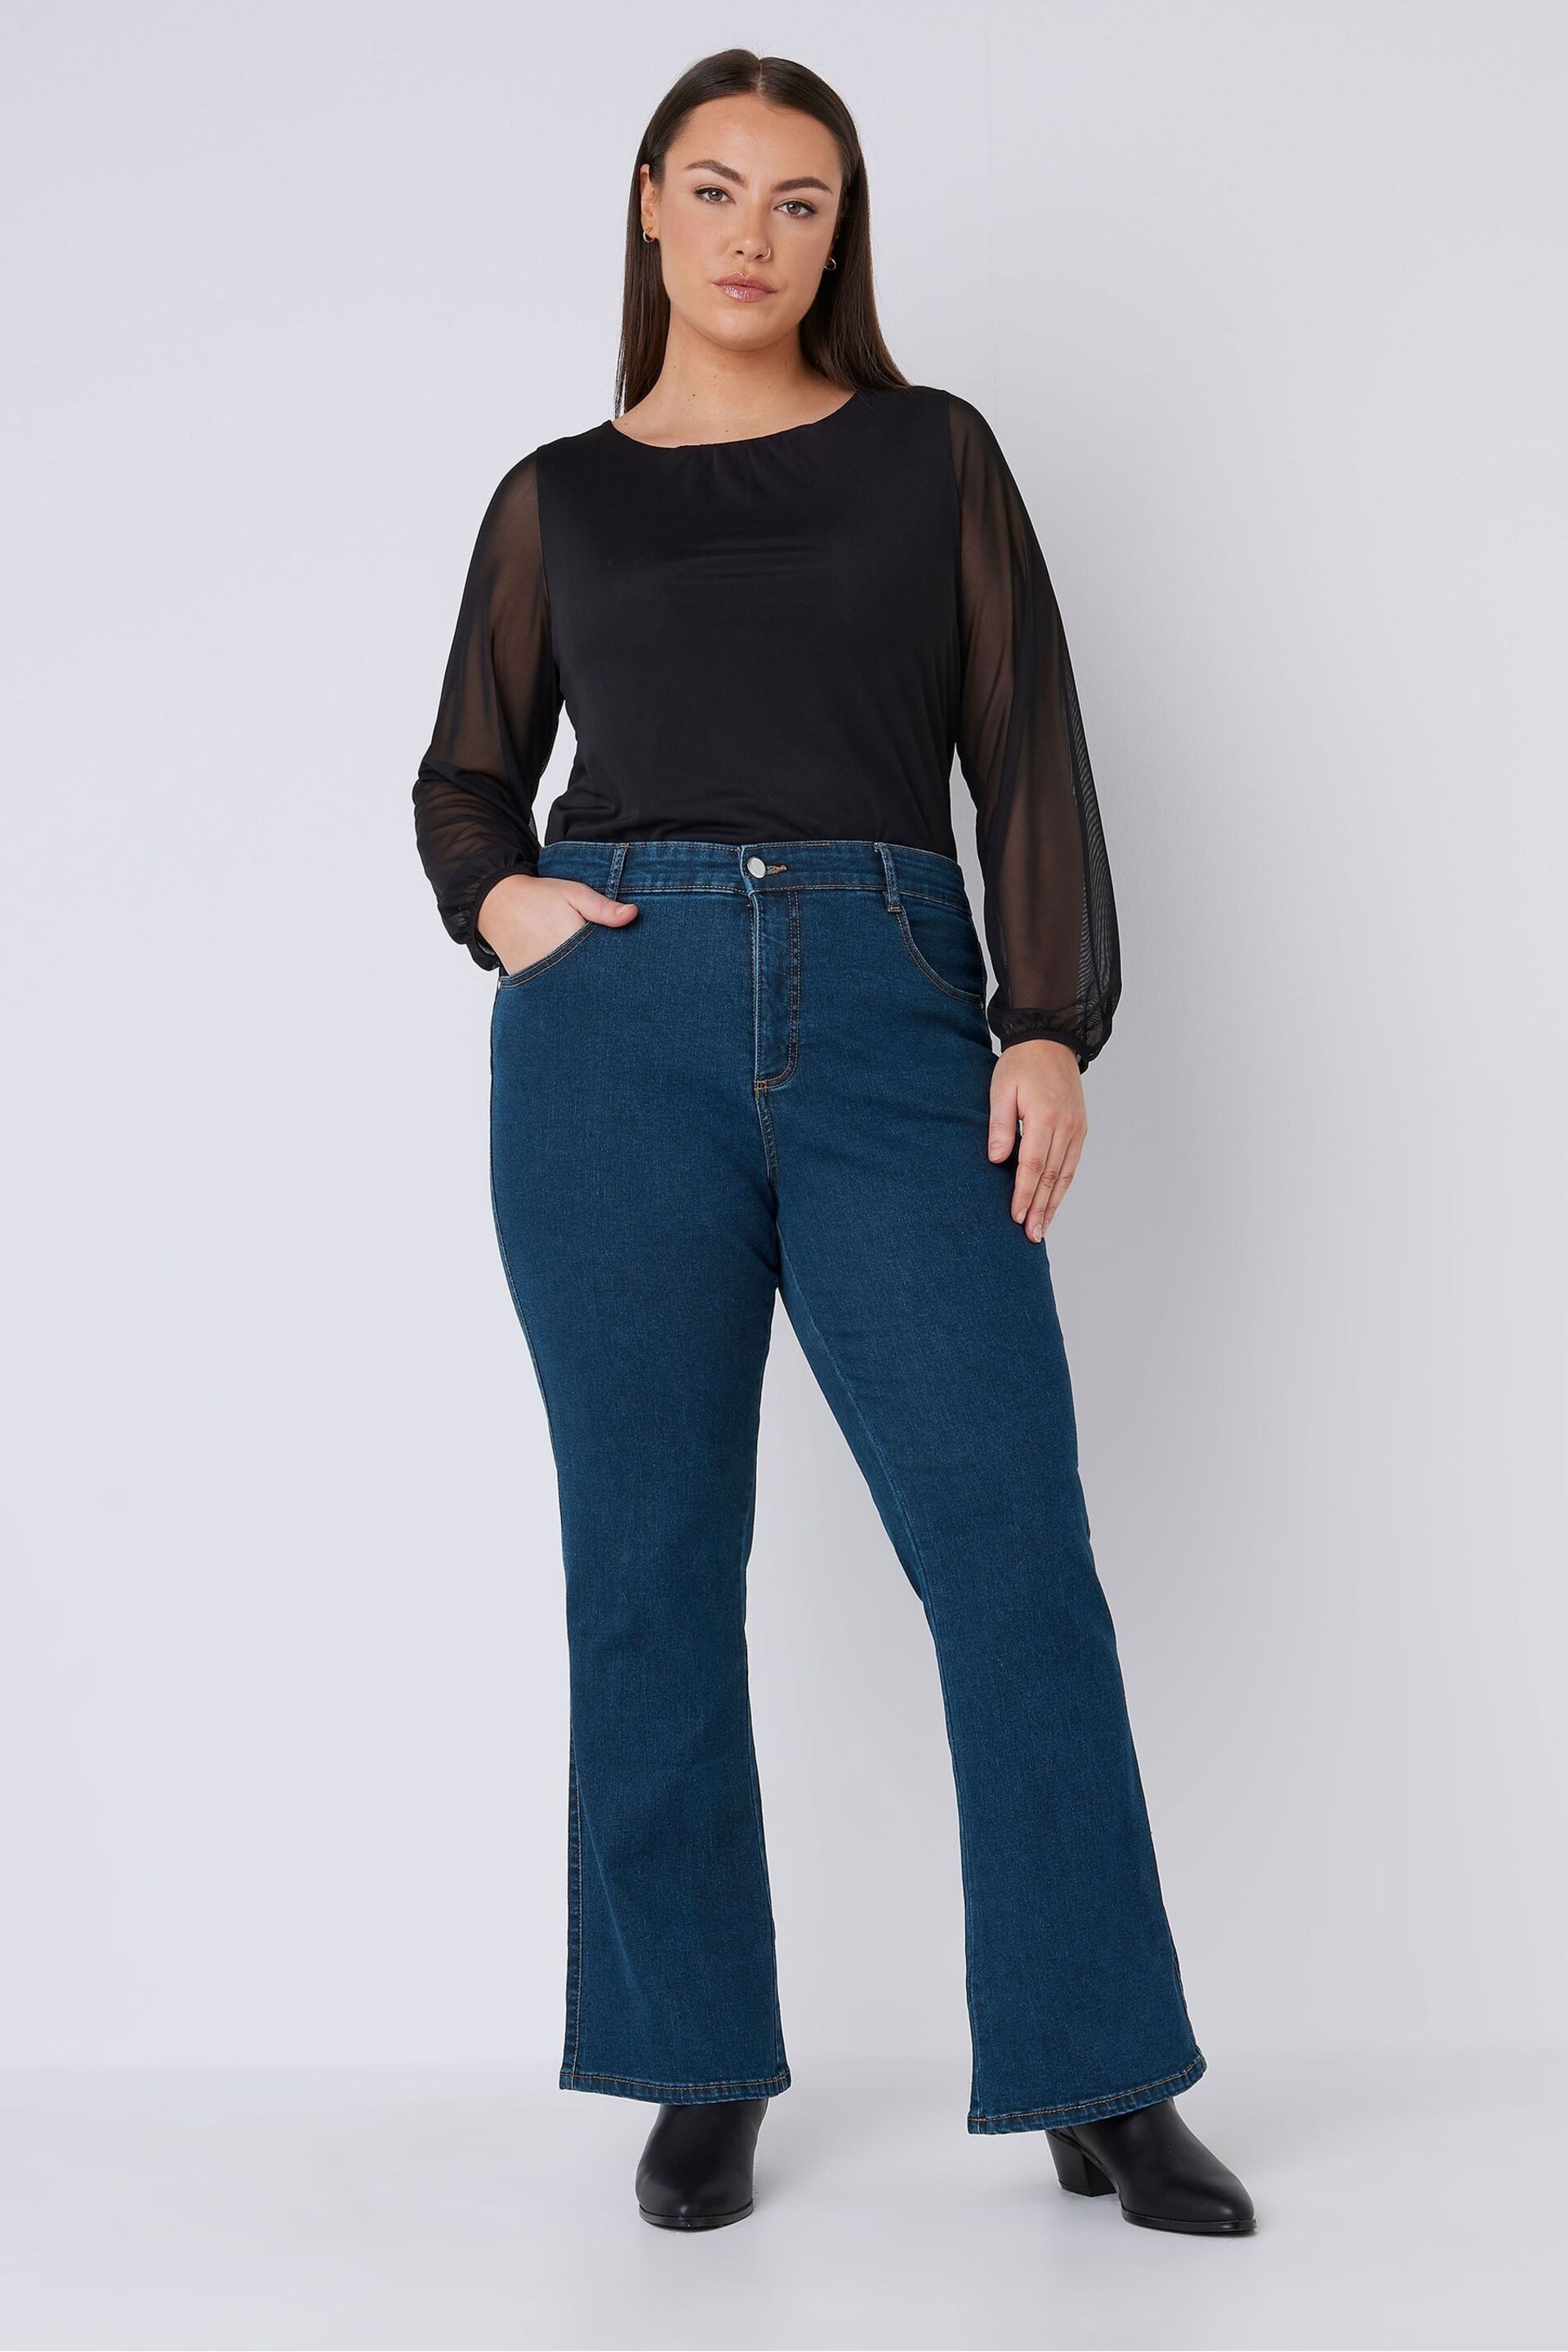 Evans Curve Fit Bootcut Ground Jeans - Image 2 of 5